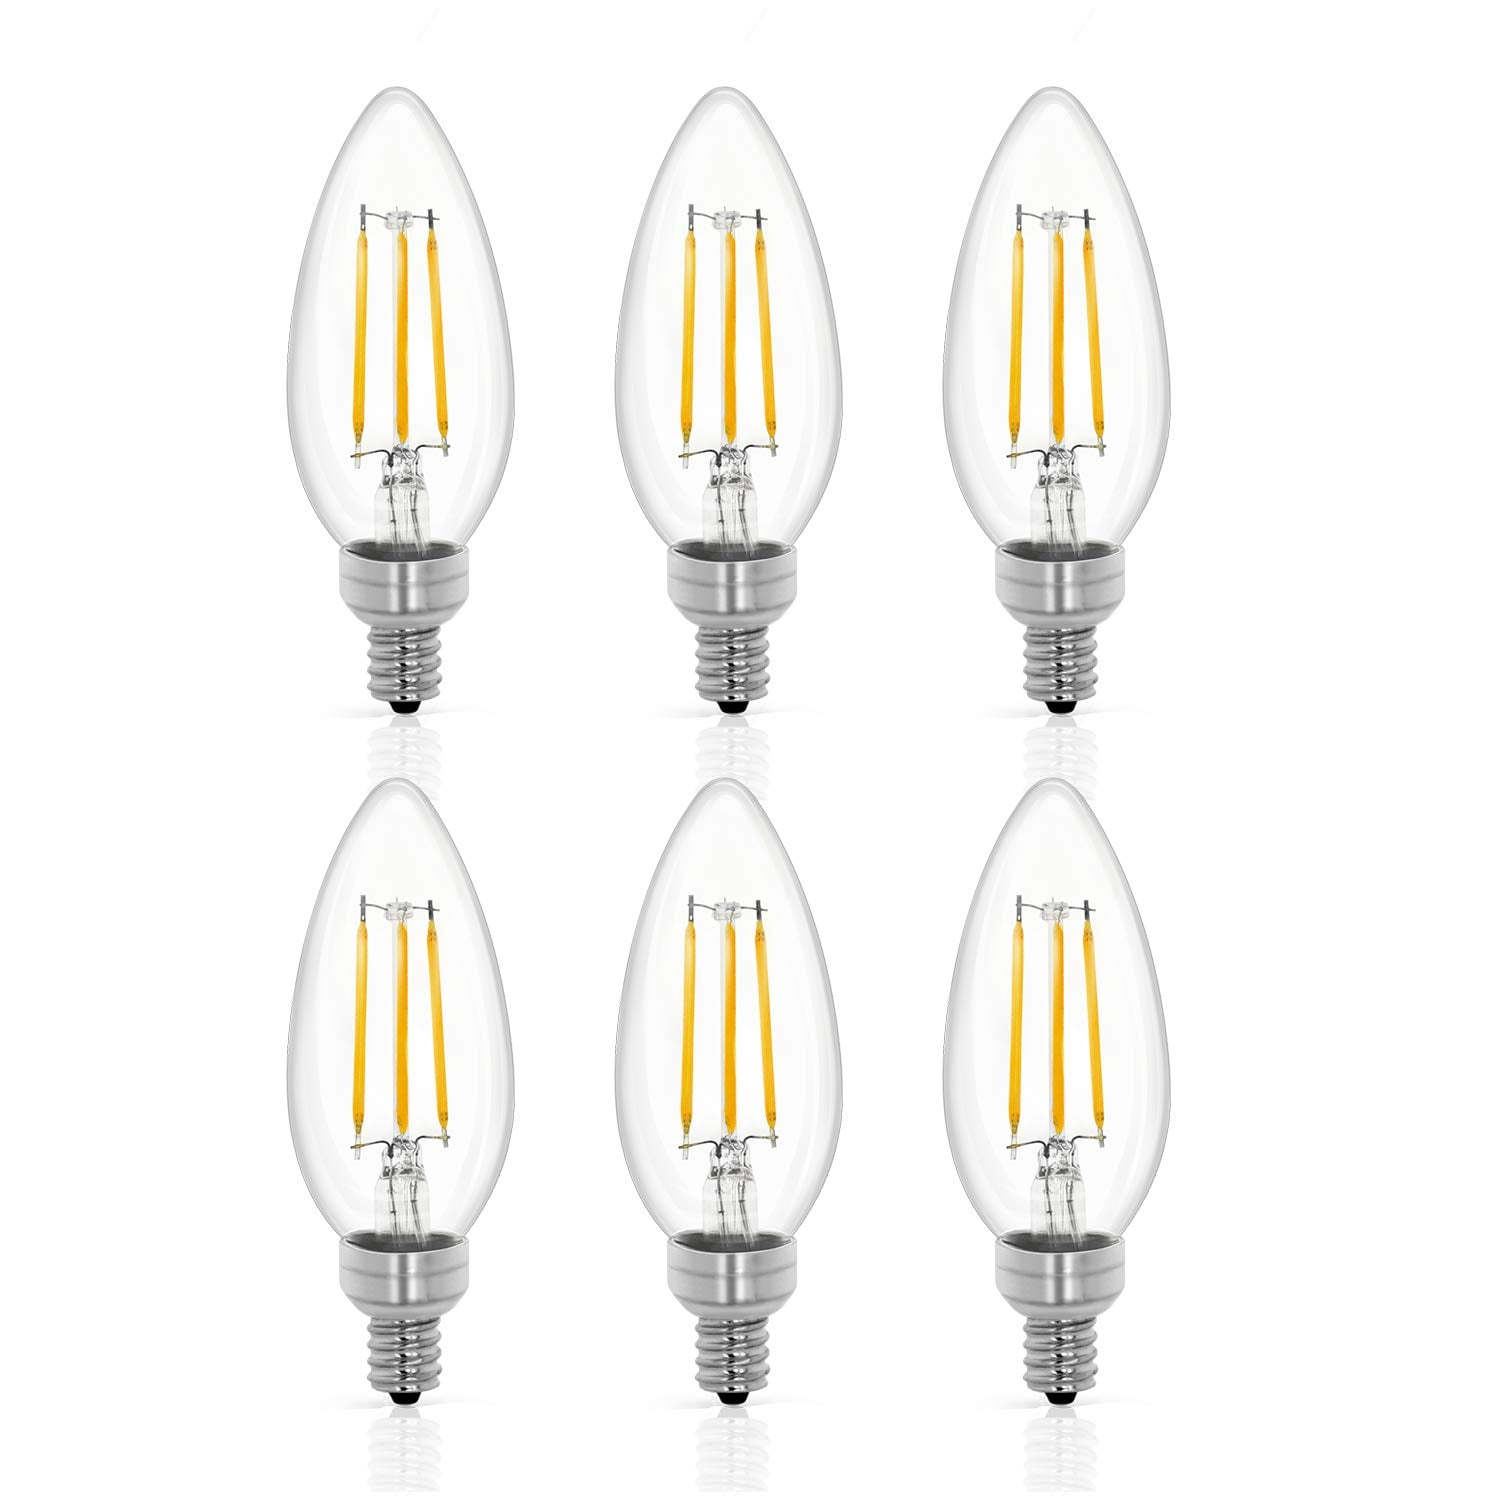 UL Listed 6 Pack Joddge C35 Candelabra Edison LED Light Bulb 6W Equivalent 60W Incandescent E12 Base Clear 2700K Dimmable Warm White 